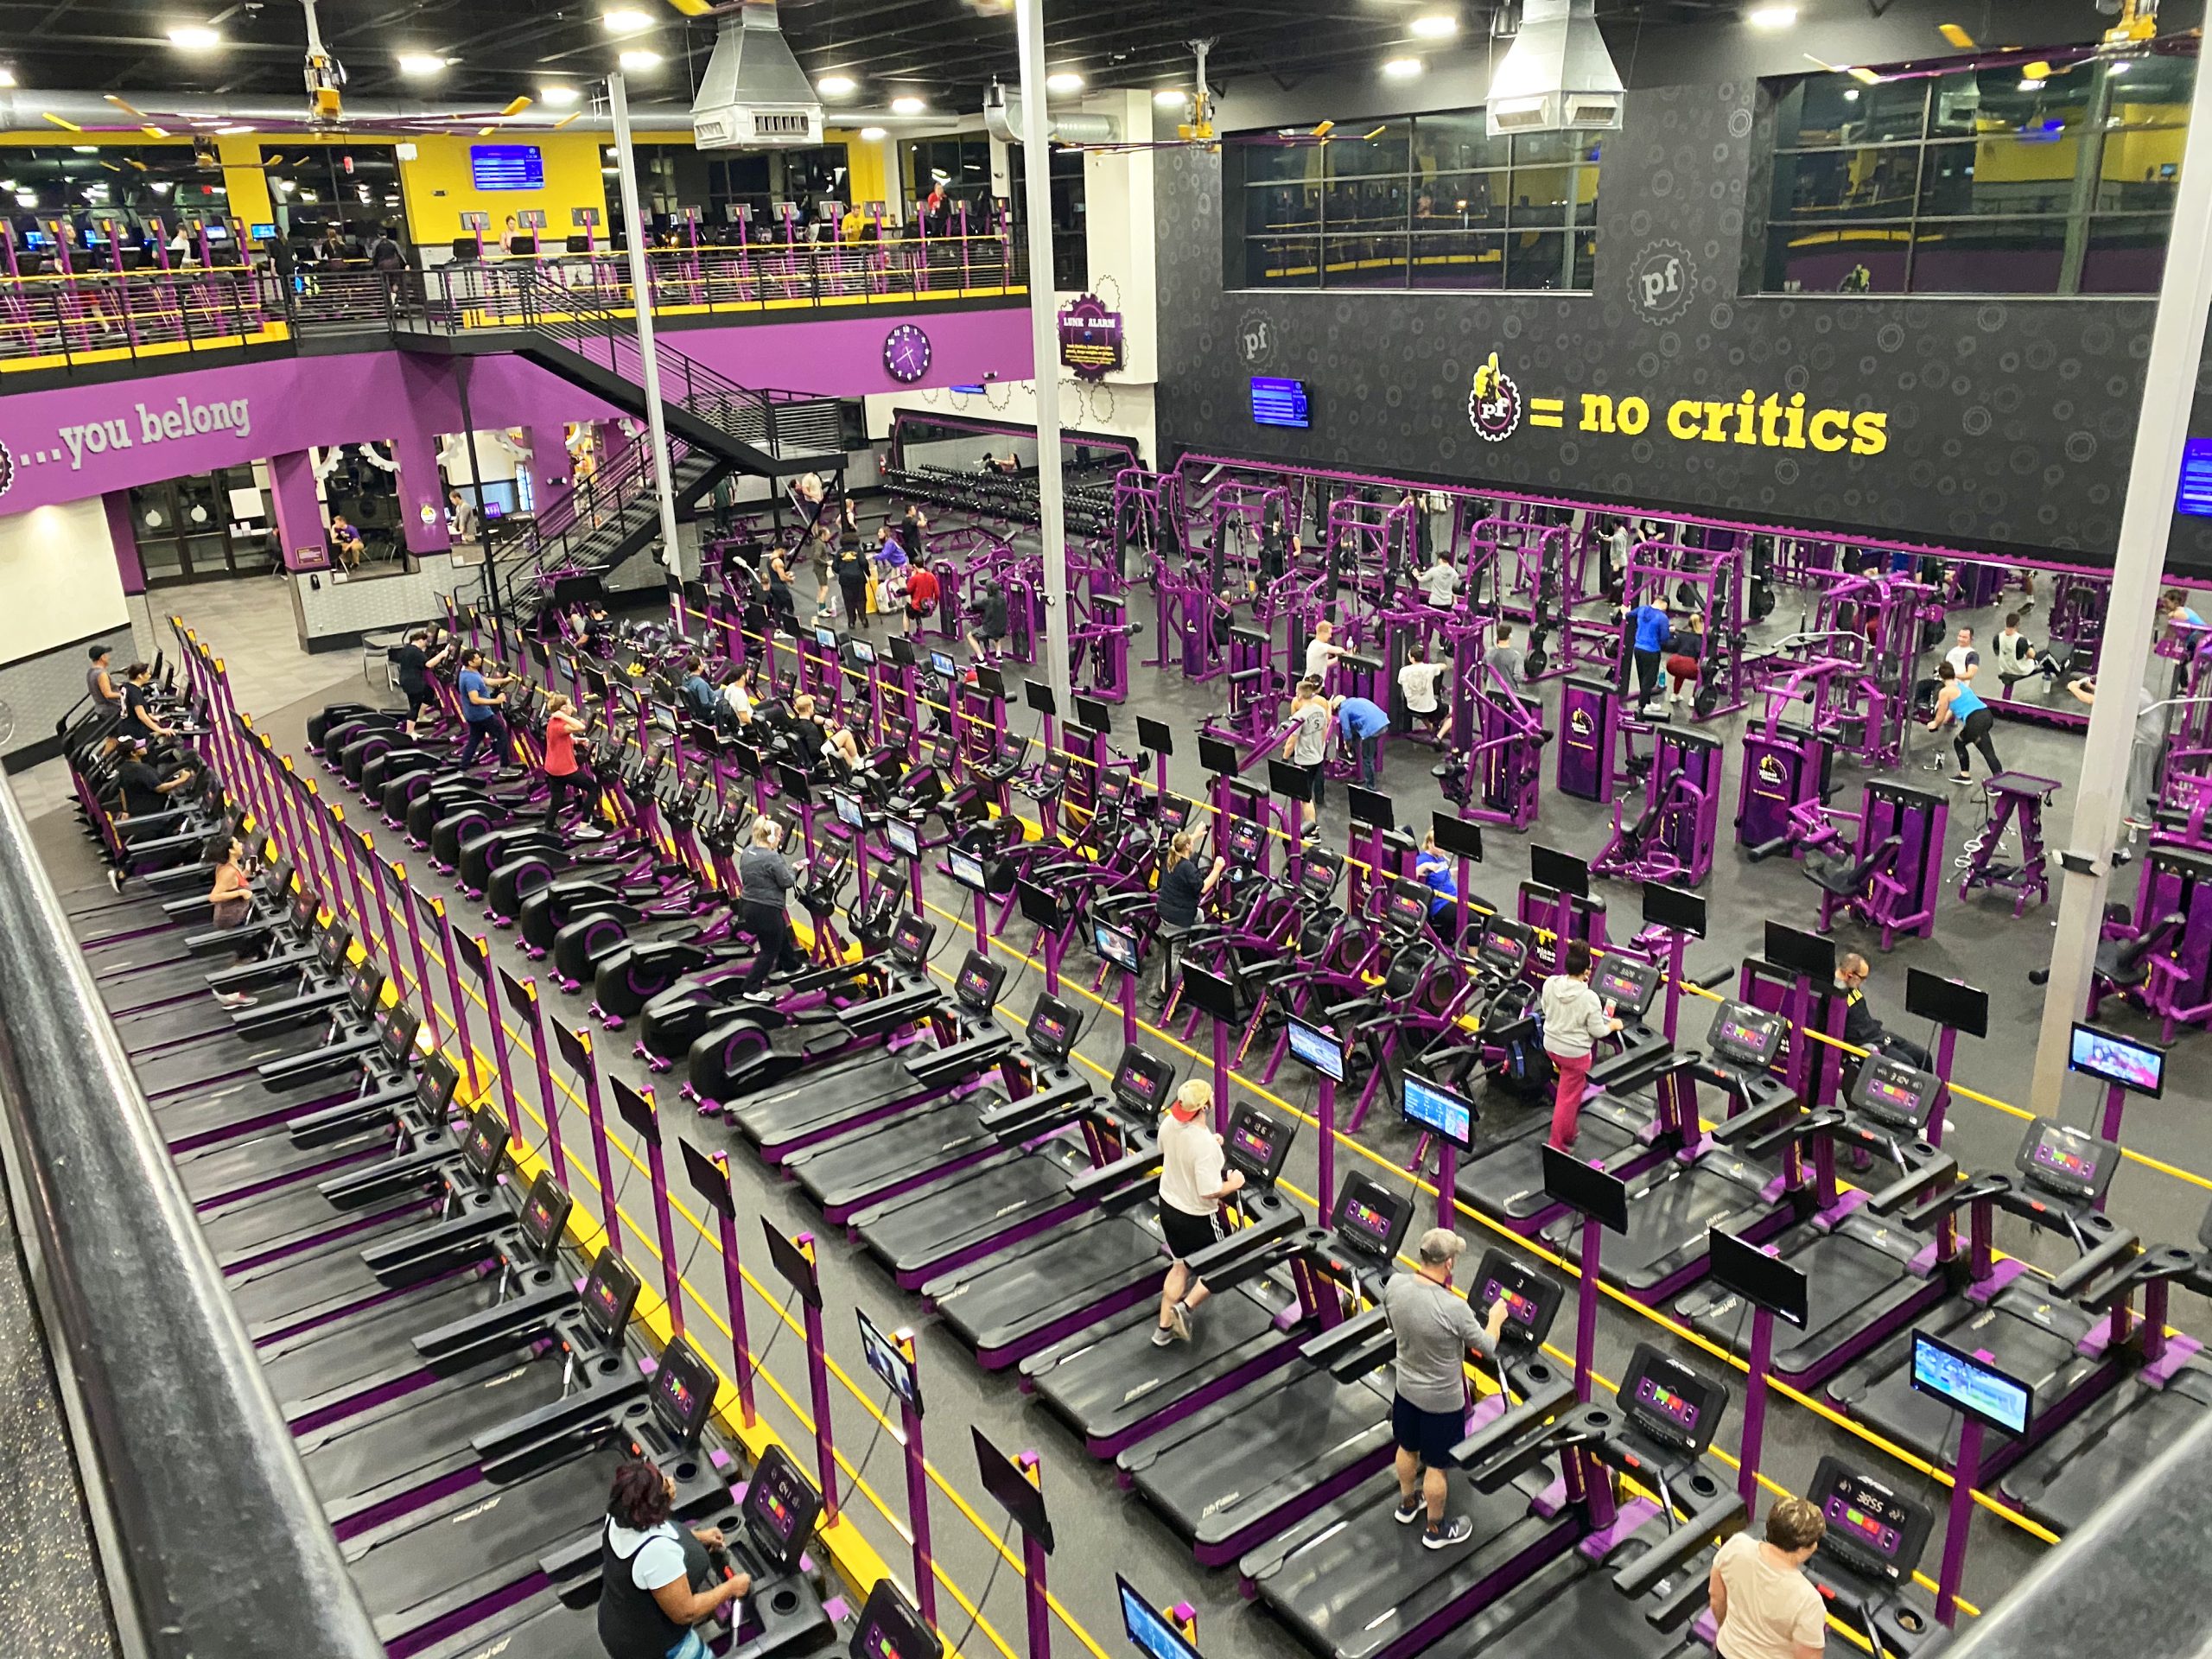  How Much Do Guests Pay At Planet Fitness for Gym